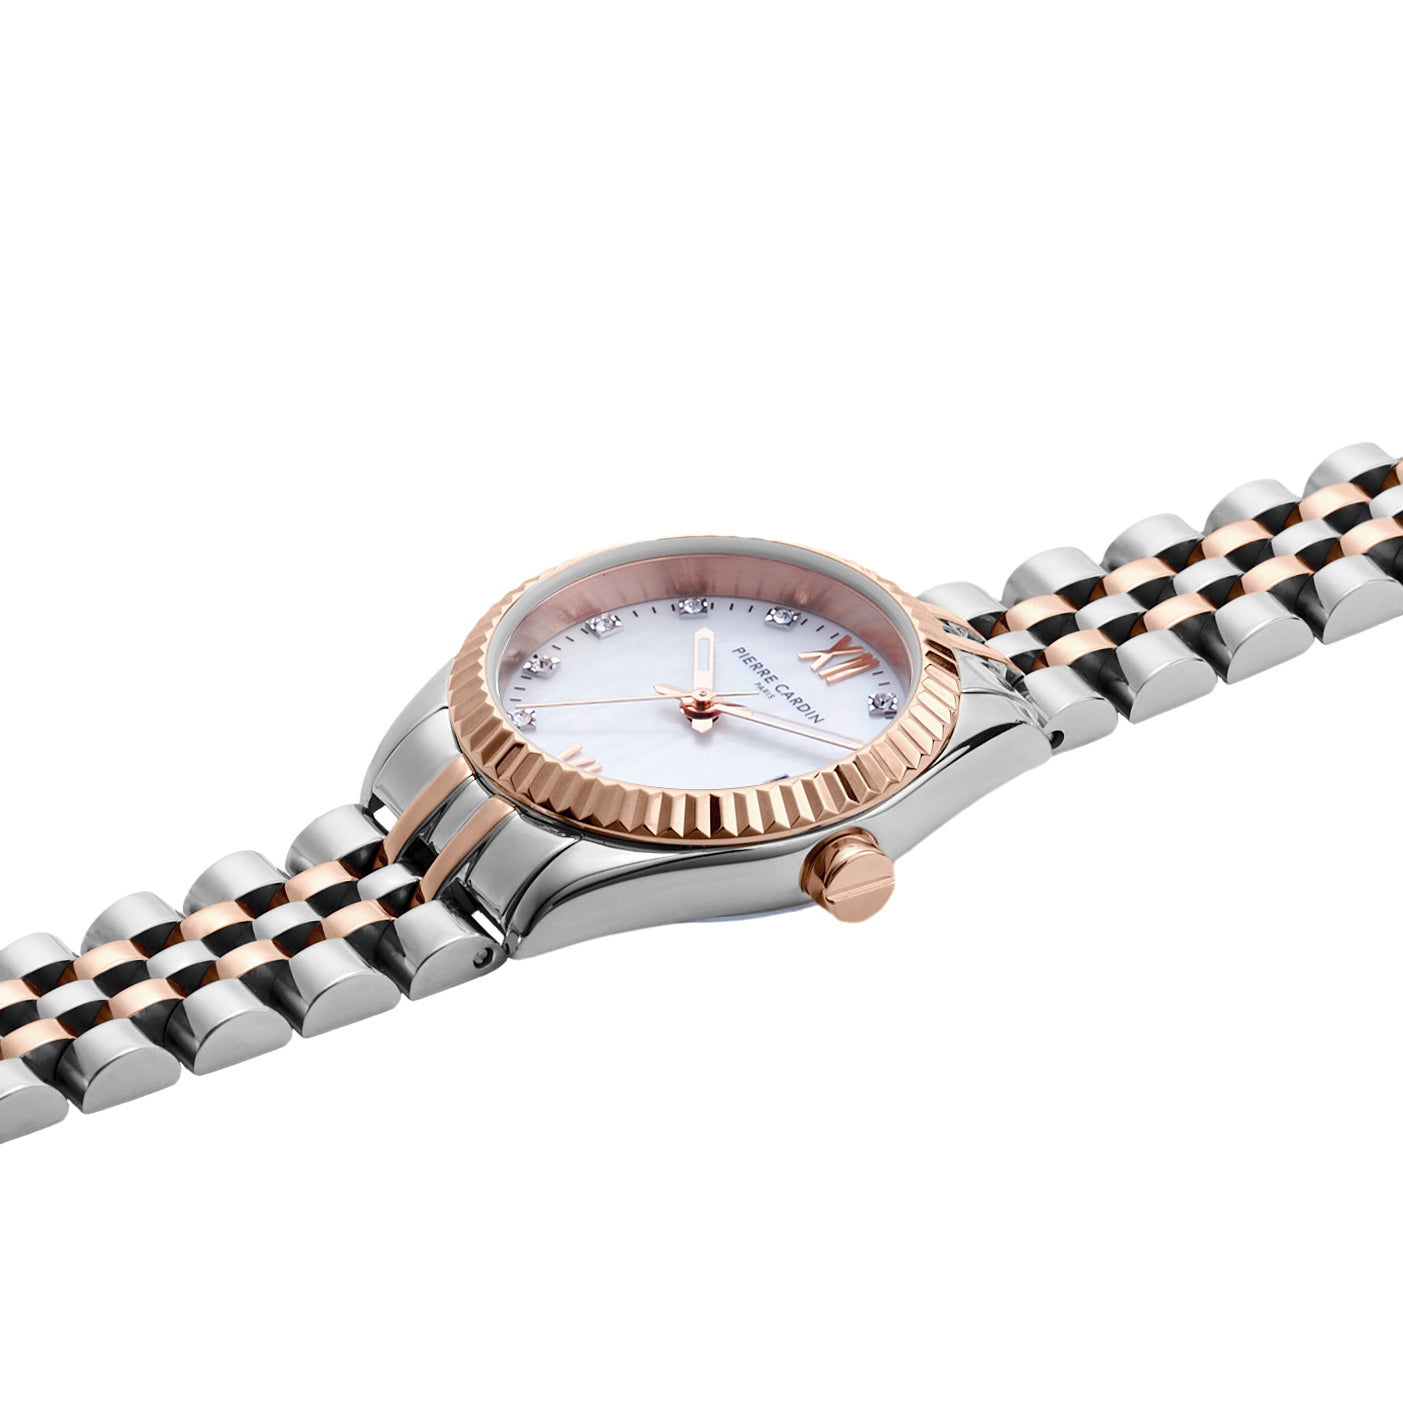 Opera Two Tone Rose Gold and Stainless Steel Date Watch with Fluted Bezel  and Crystals on a Mother of Pearl Dial